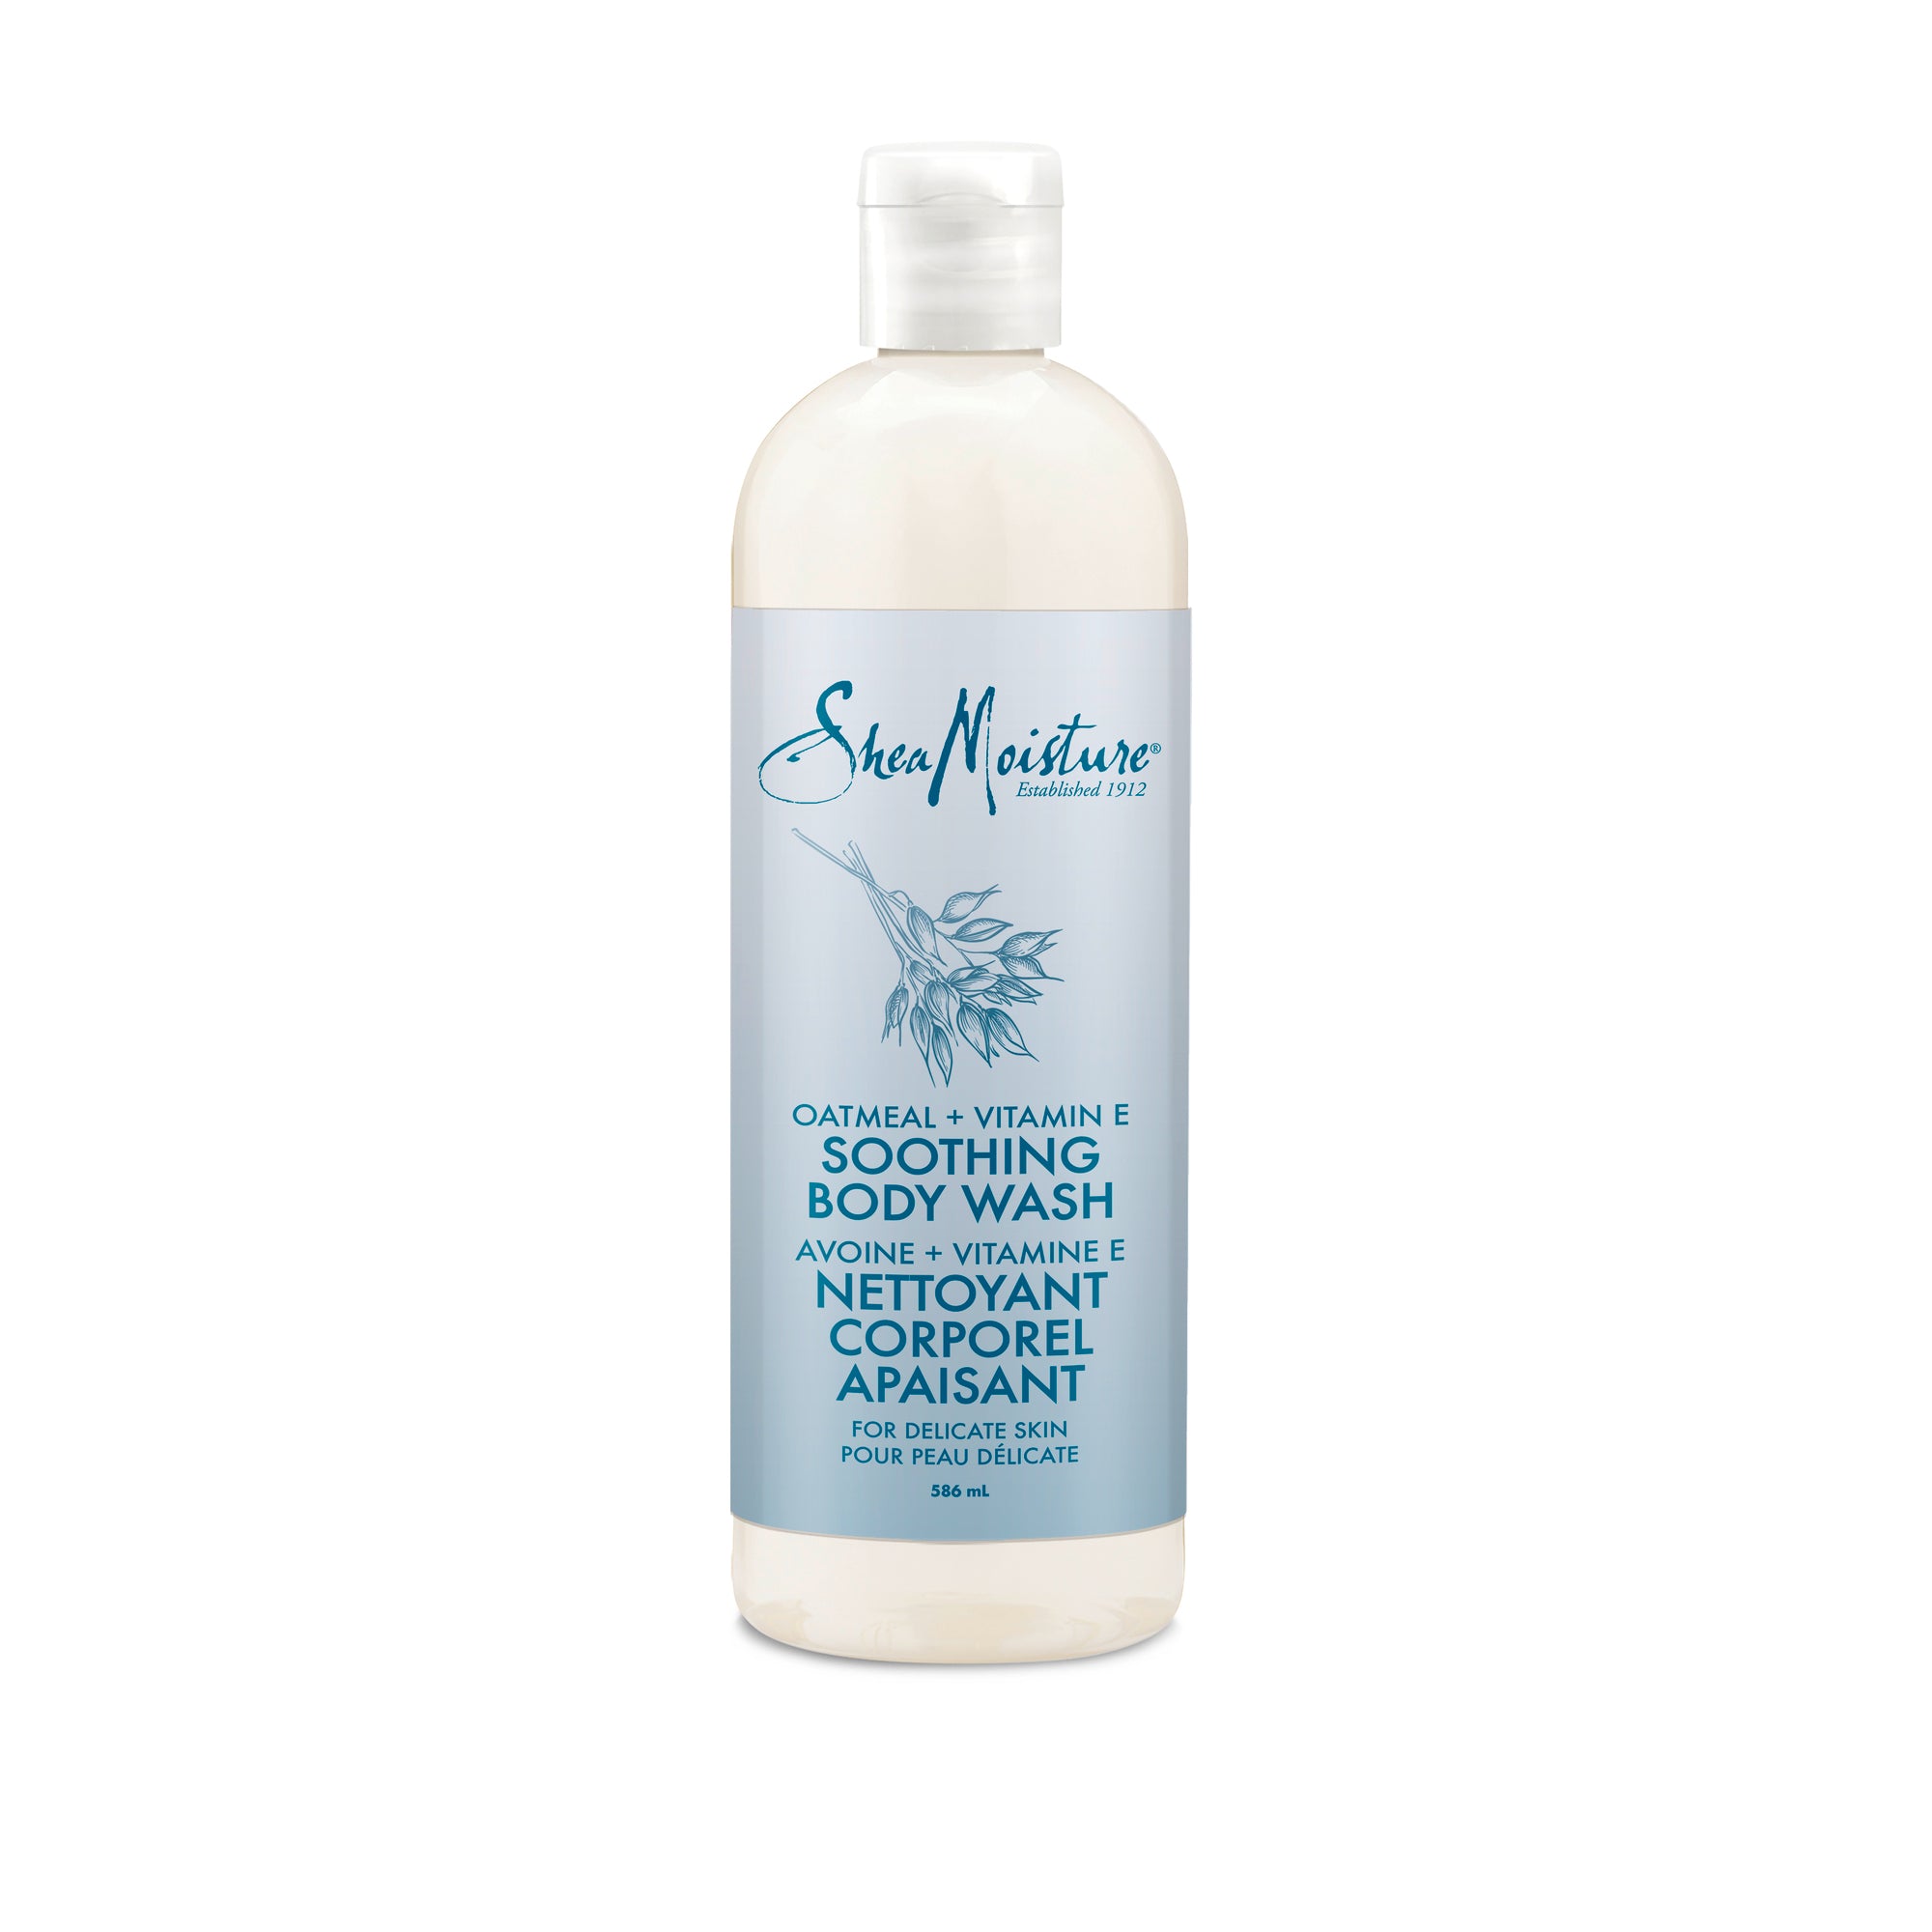 Showing the front angle view of the SheaMoisture Oatmeal & Vitamin E Soothing Body Wash 586mL product.